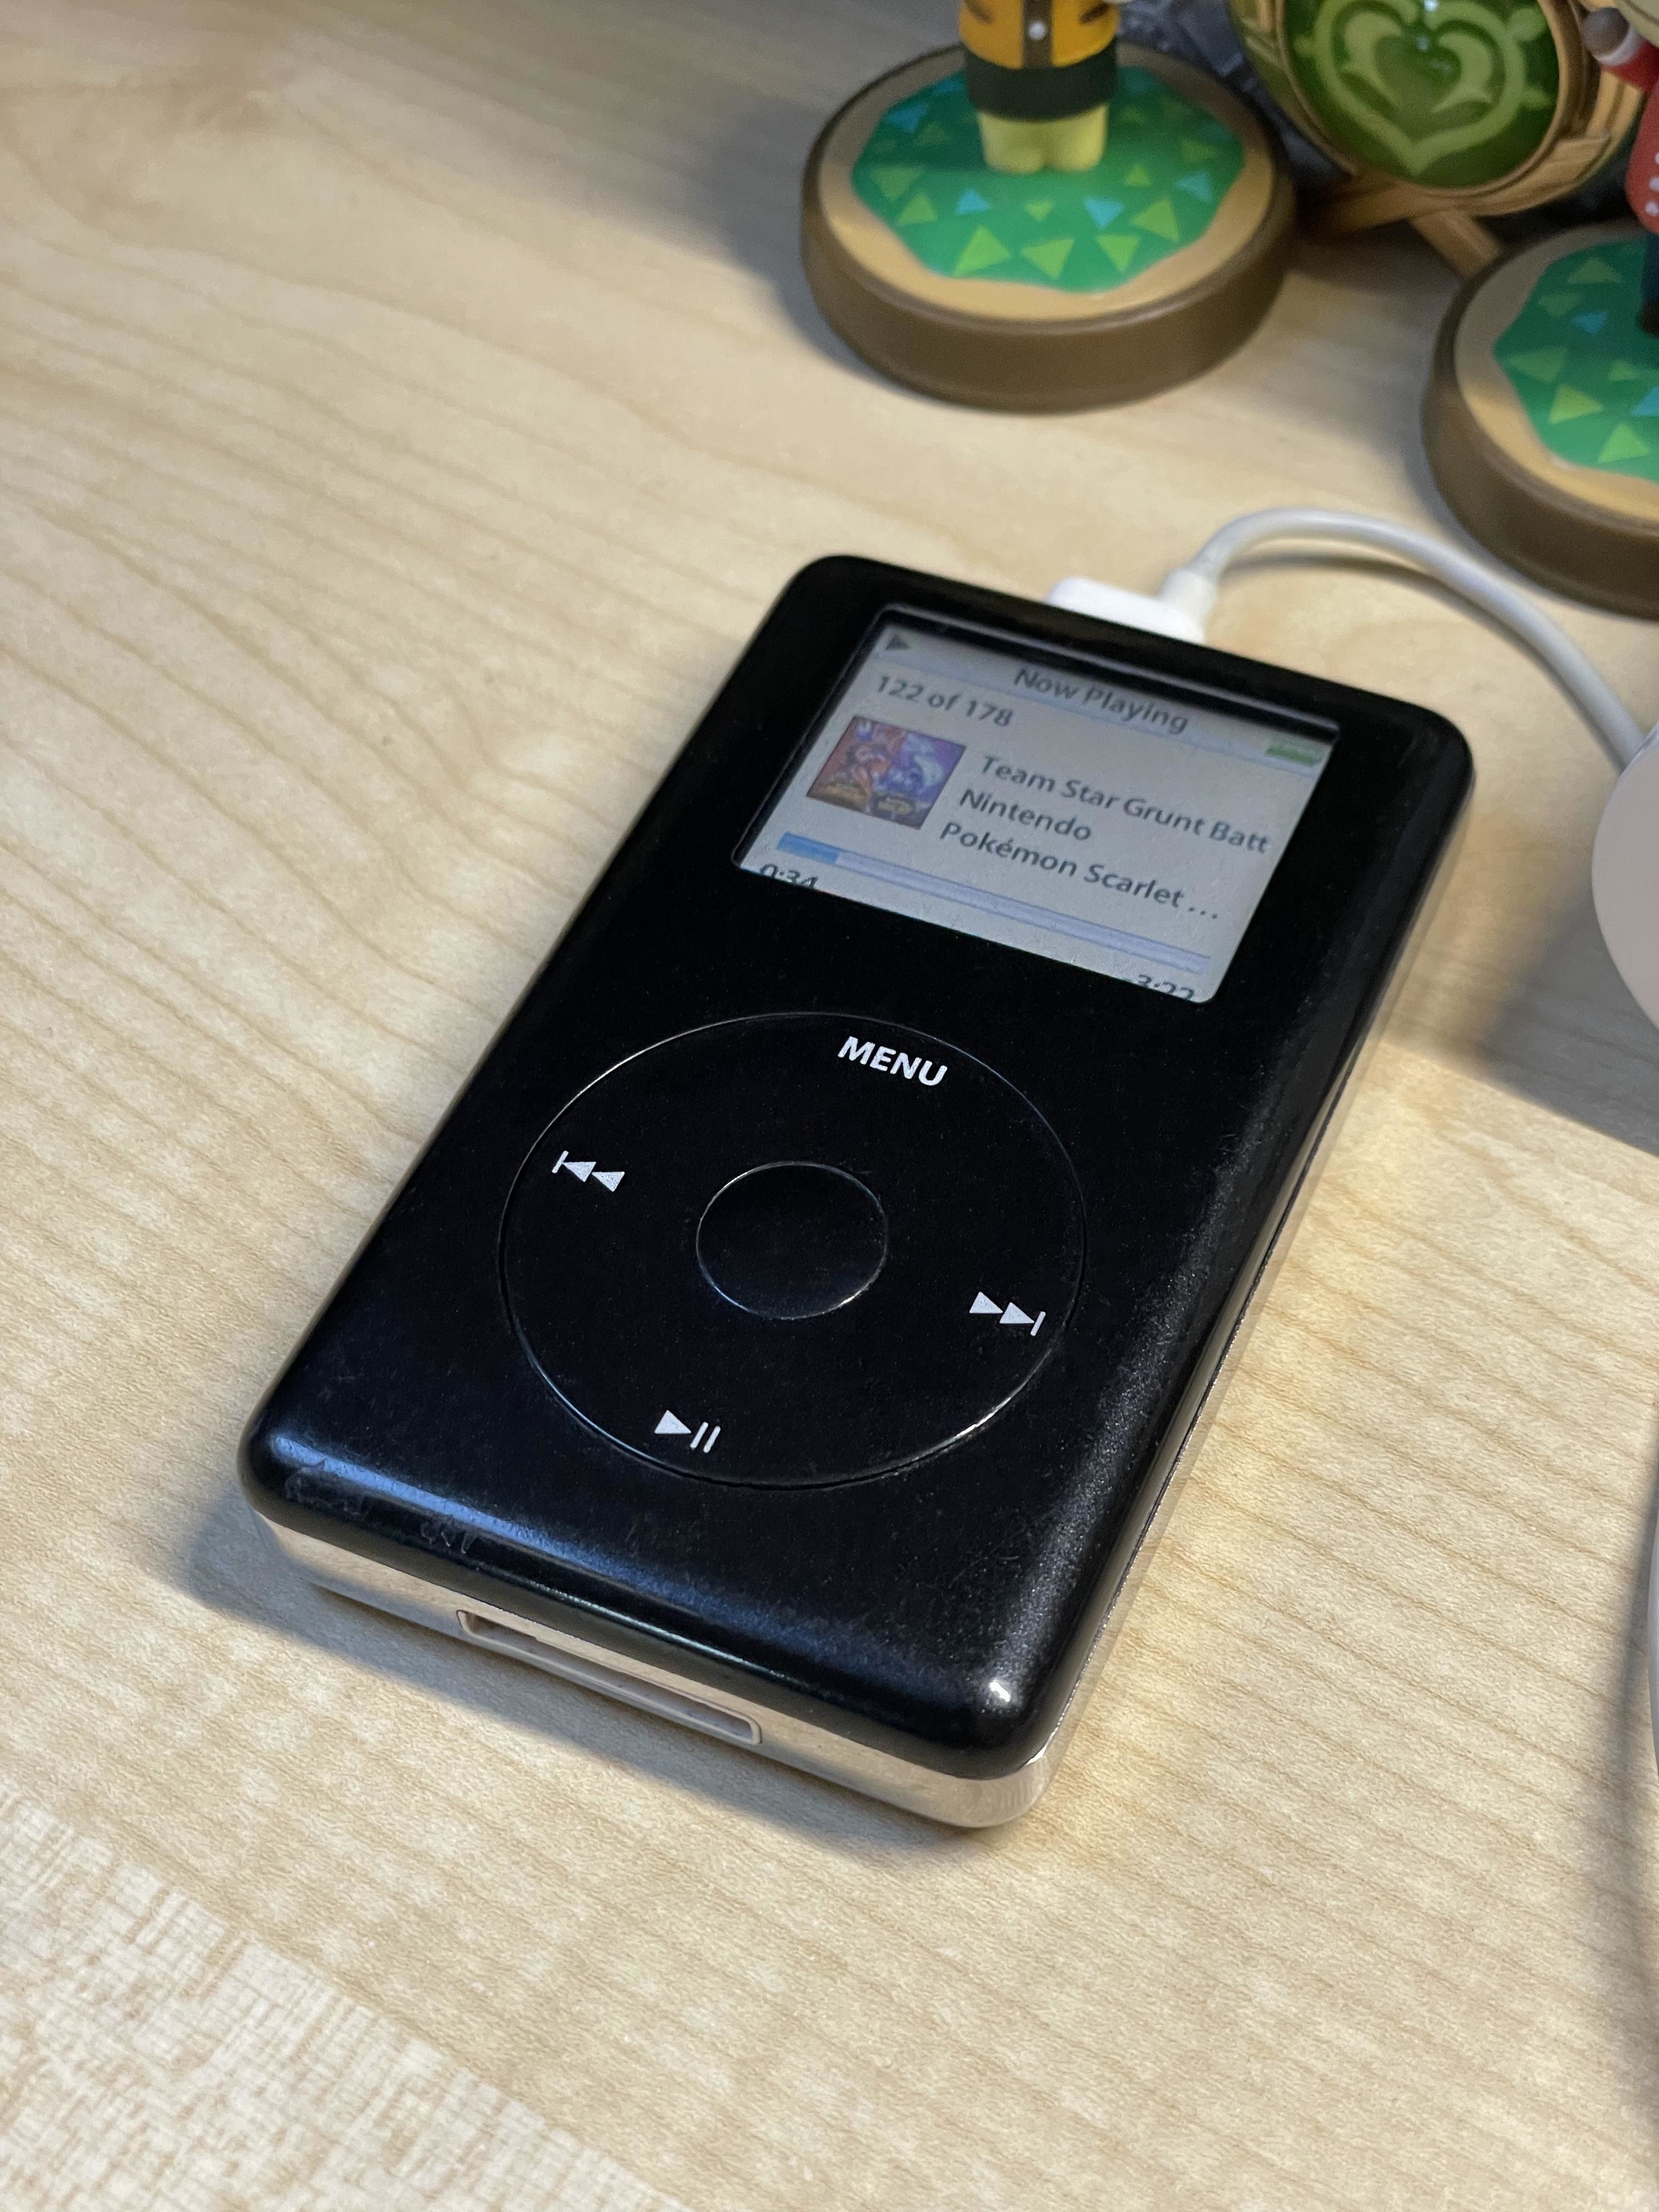 a black 4th generation ipod being charged